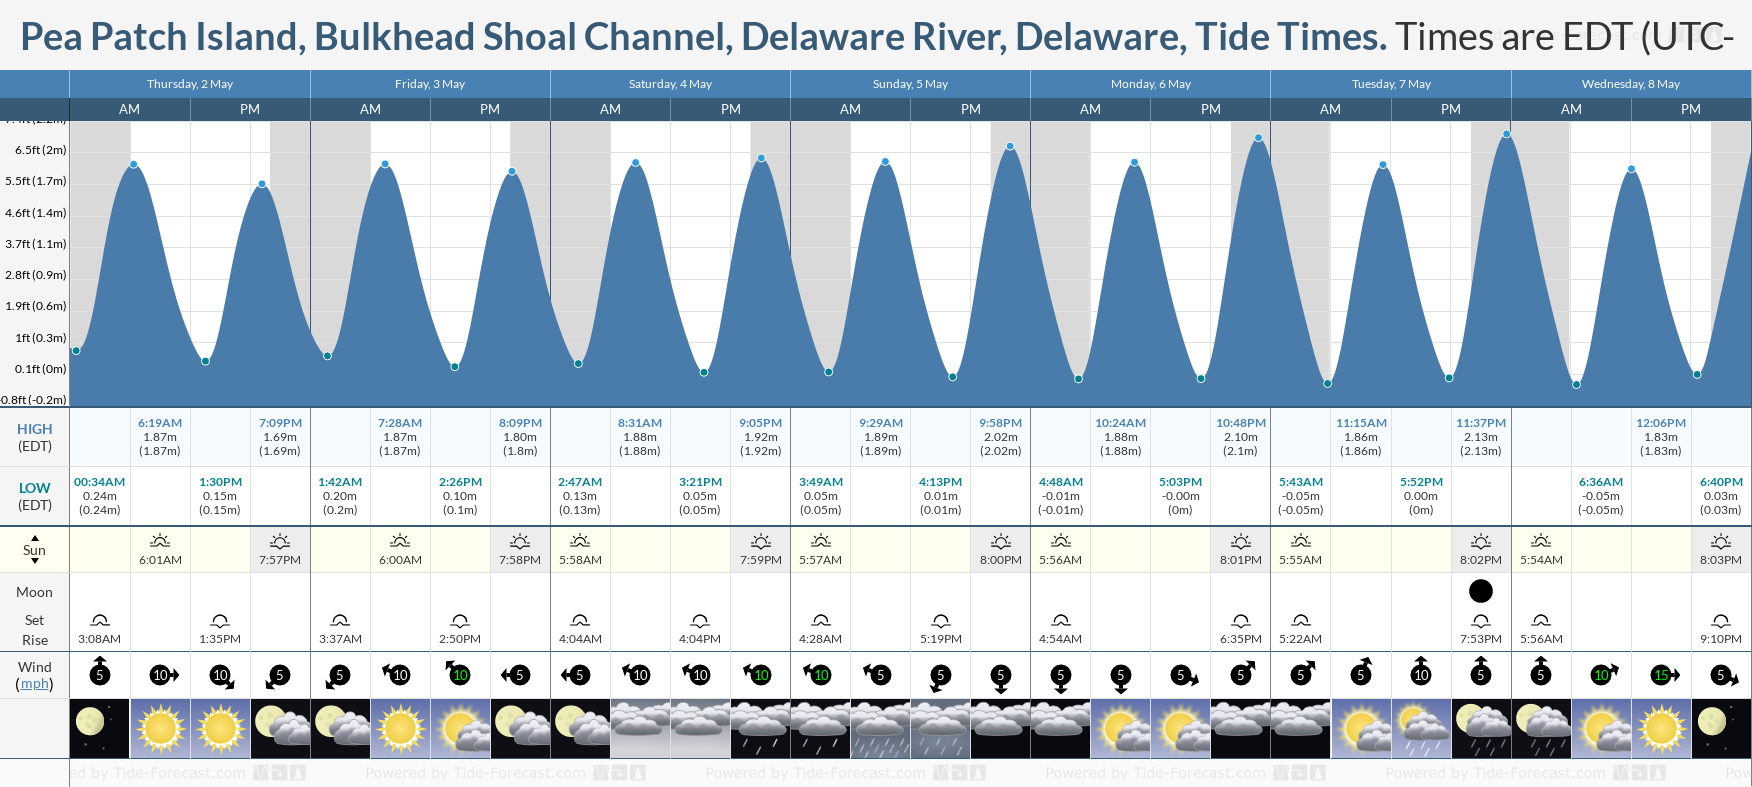 Pea Patch Island, Bulkhead Shoal Channel, Delaware River, Delaware Tide Chart including high and low tide tide times for the next 7 days